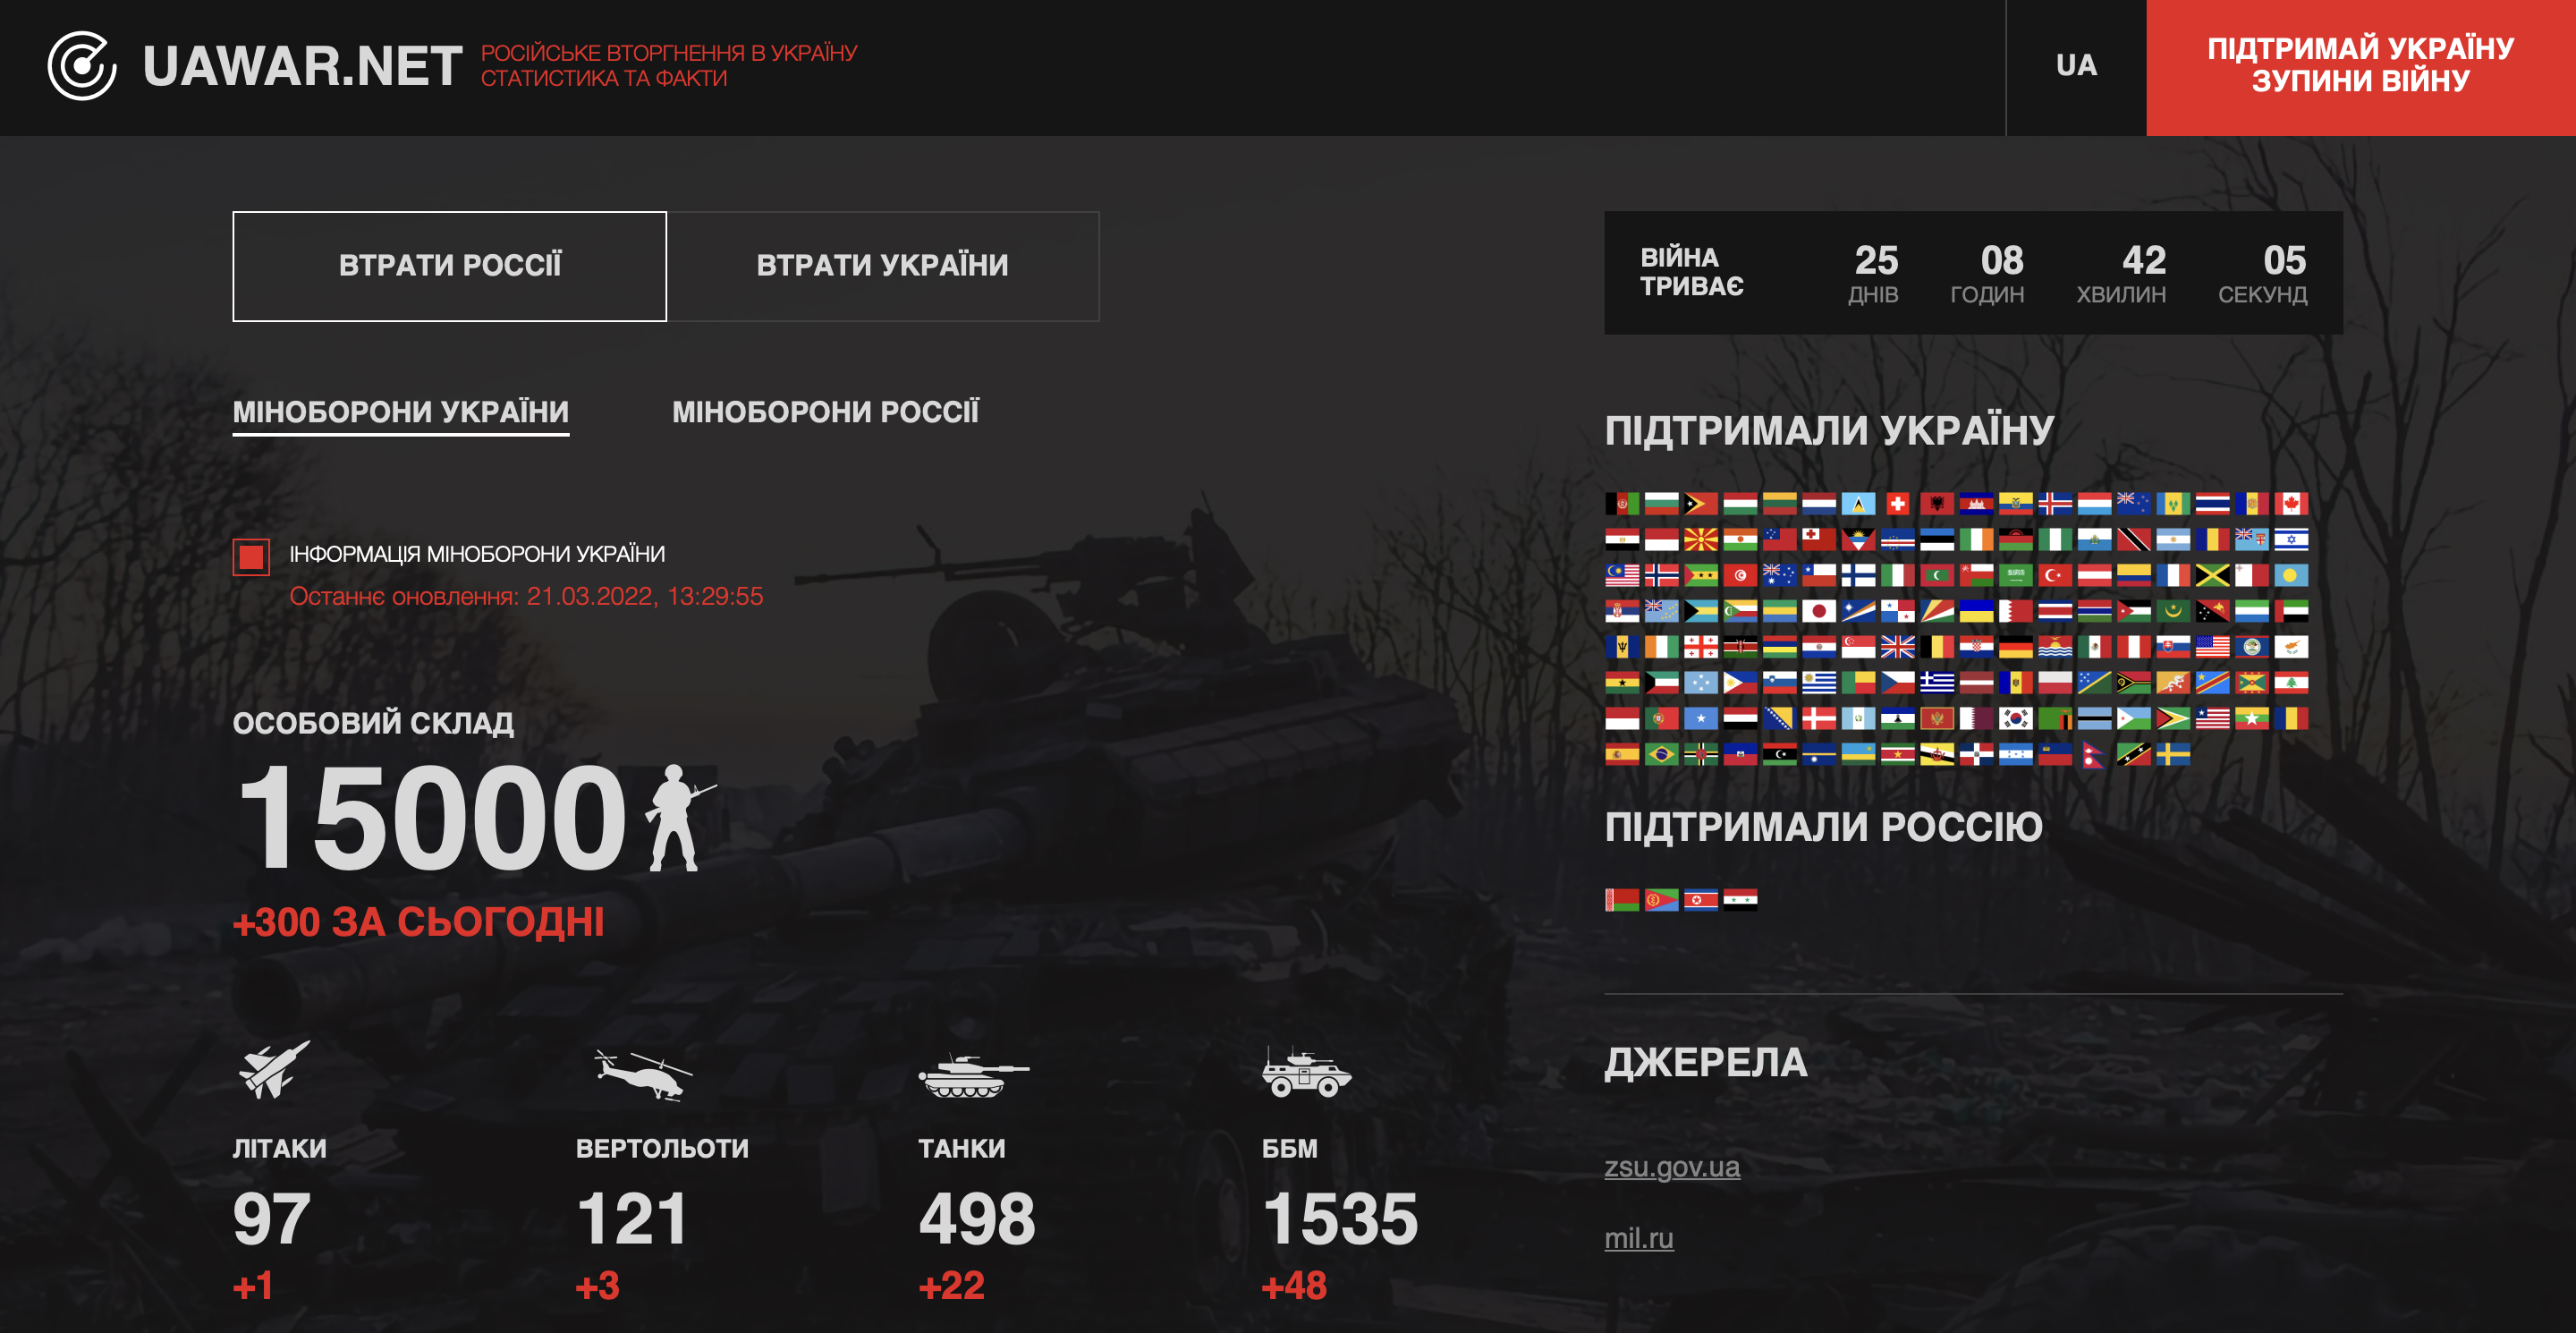 uawar and minusrus: sites where you can view enemy casualty statistics